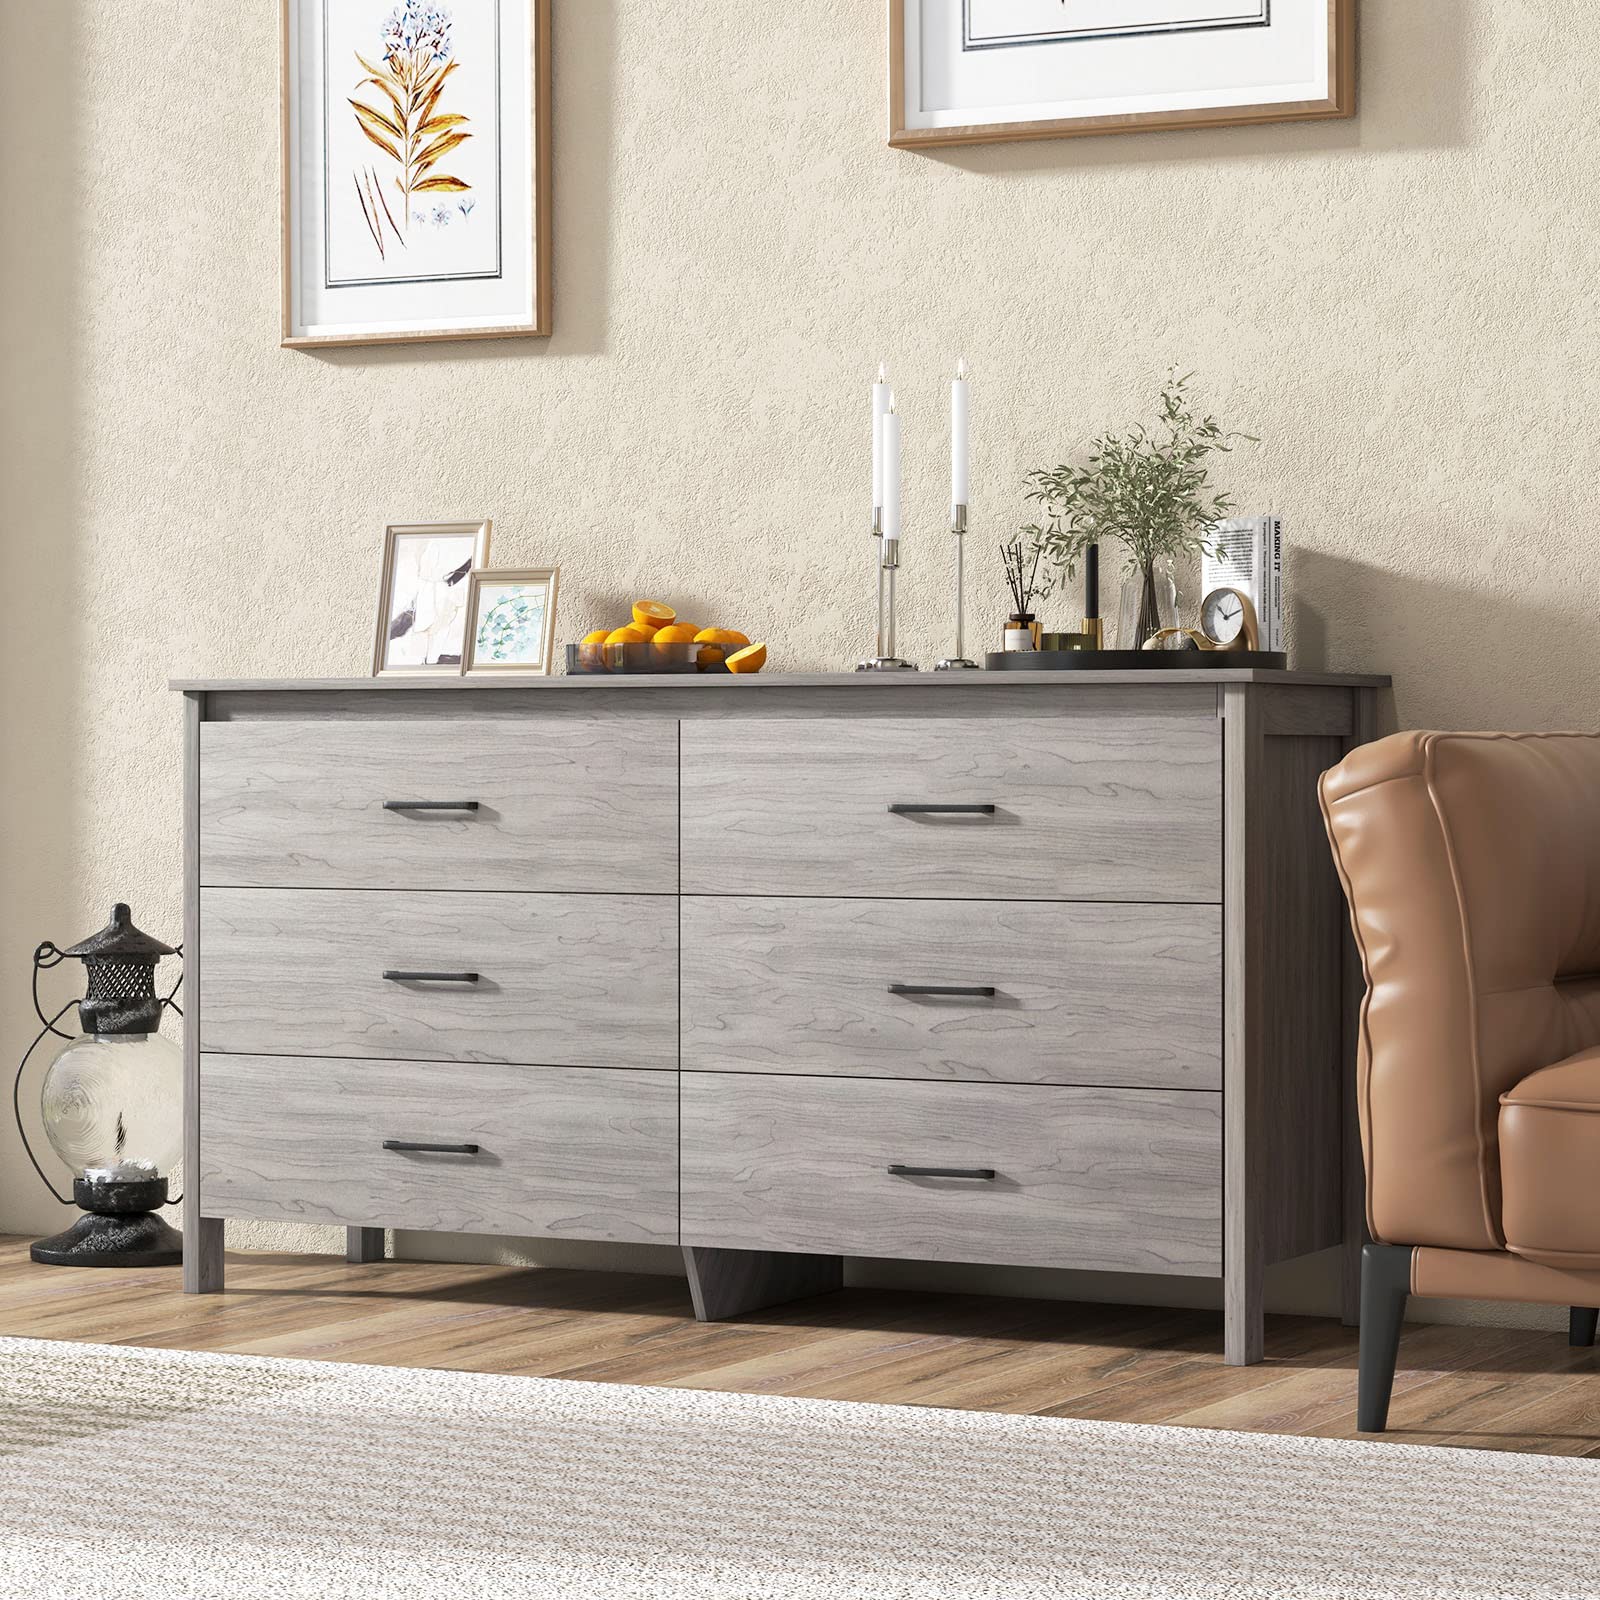 Giantex 6-Drawer Dresser for Living Room - Double Wide Chest of Drawers with Center Support & Anti-tip Kit, Grey